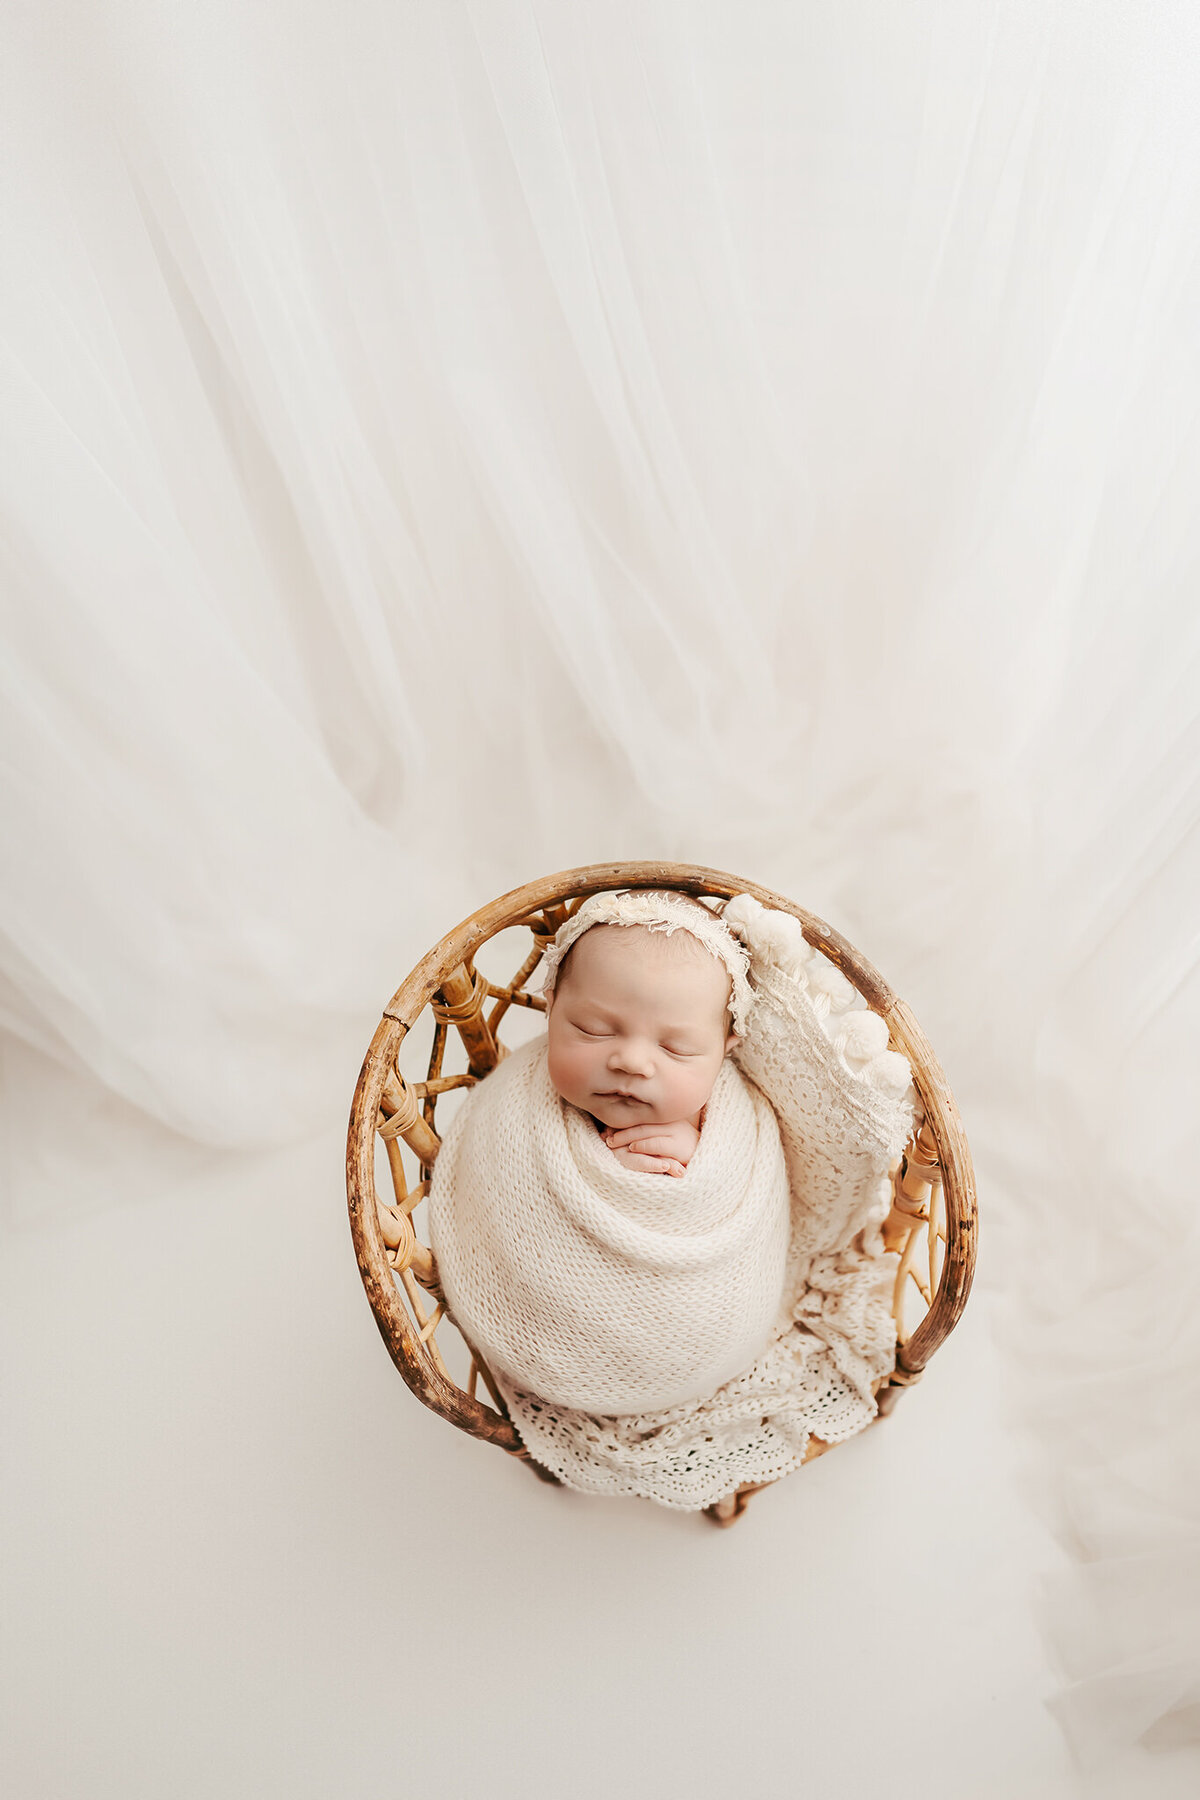 thornton baby girl photo with all white set up